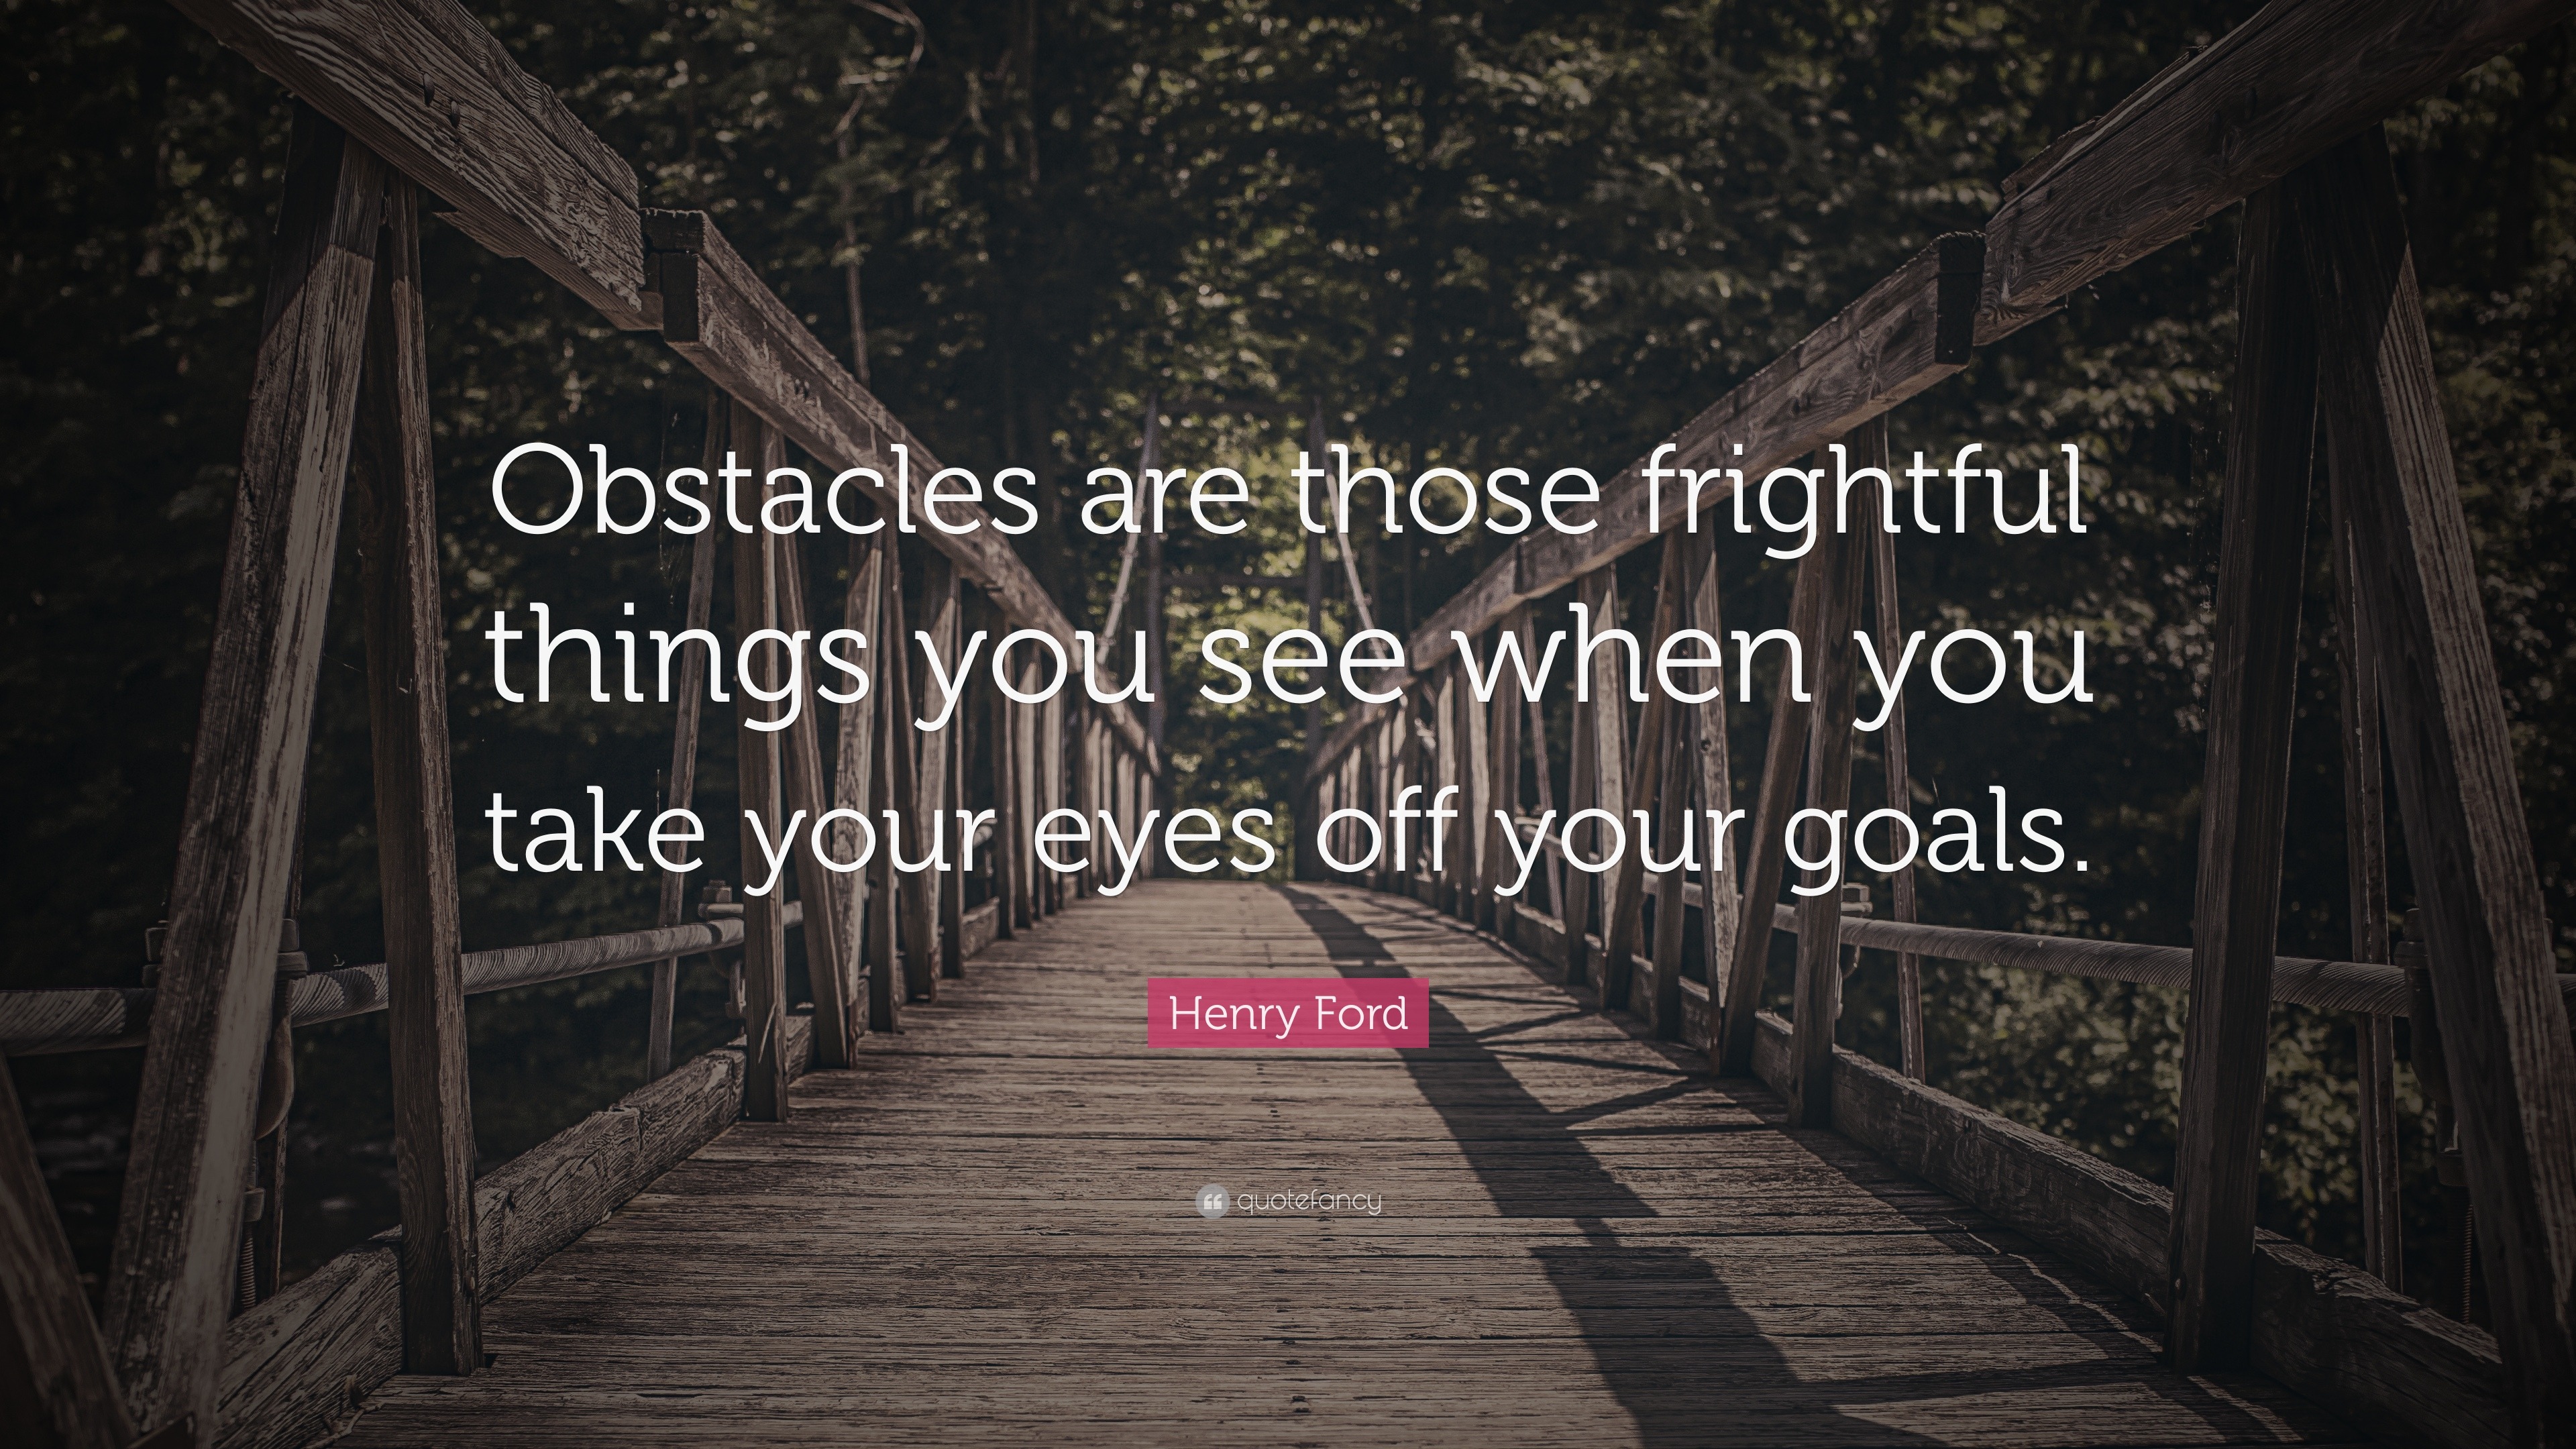 "obstacles are those frightful things you see when you take your